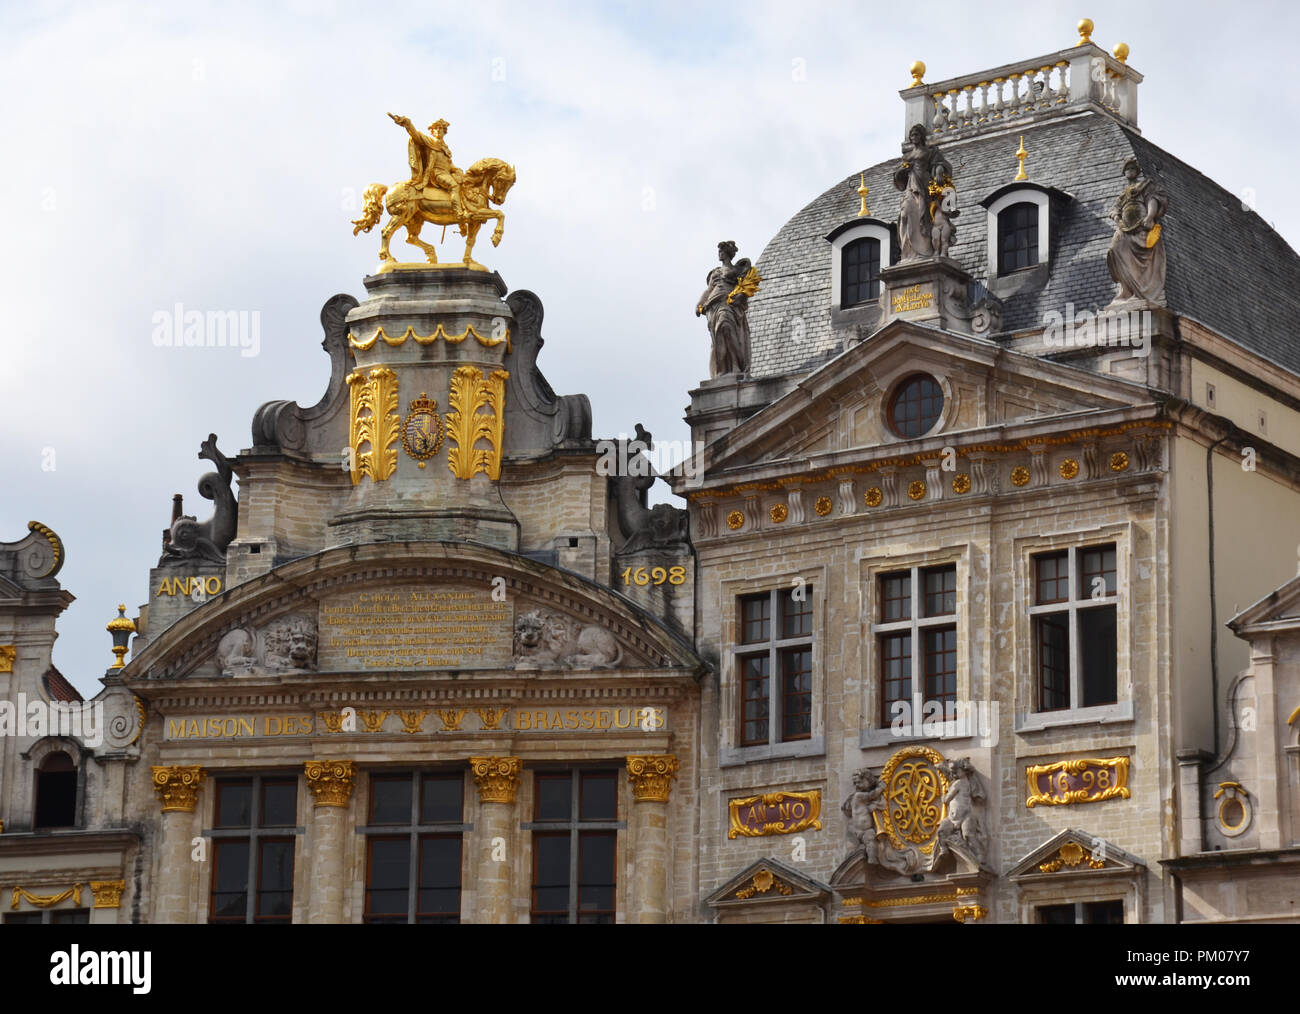 Statue of Charles Alexander of Lorraine on top the house L'Arbre d'or, on the Grand Place in Brussels, Belgium Stock Photo